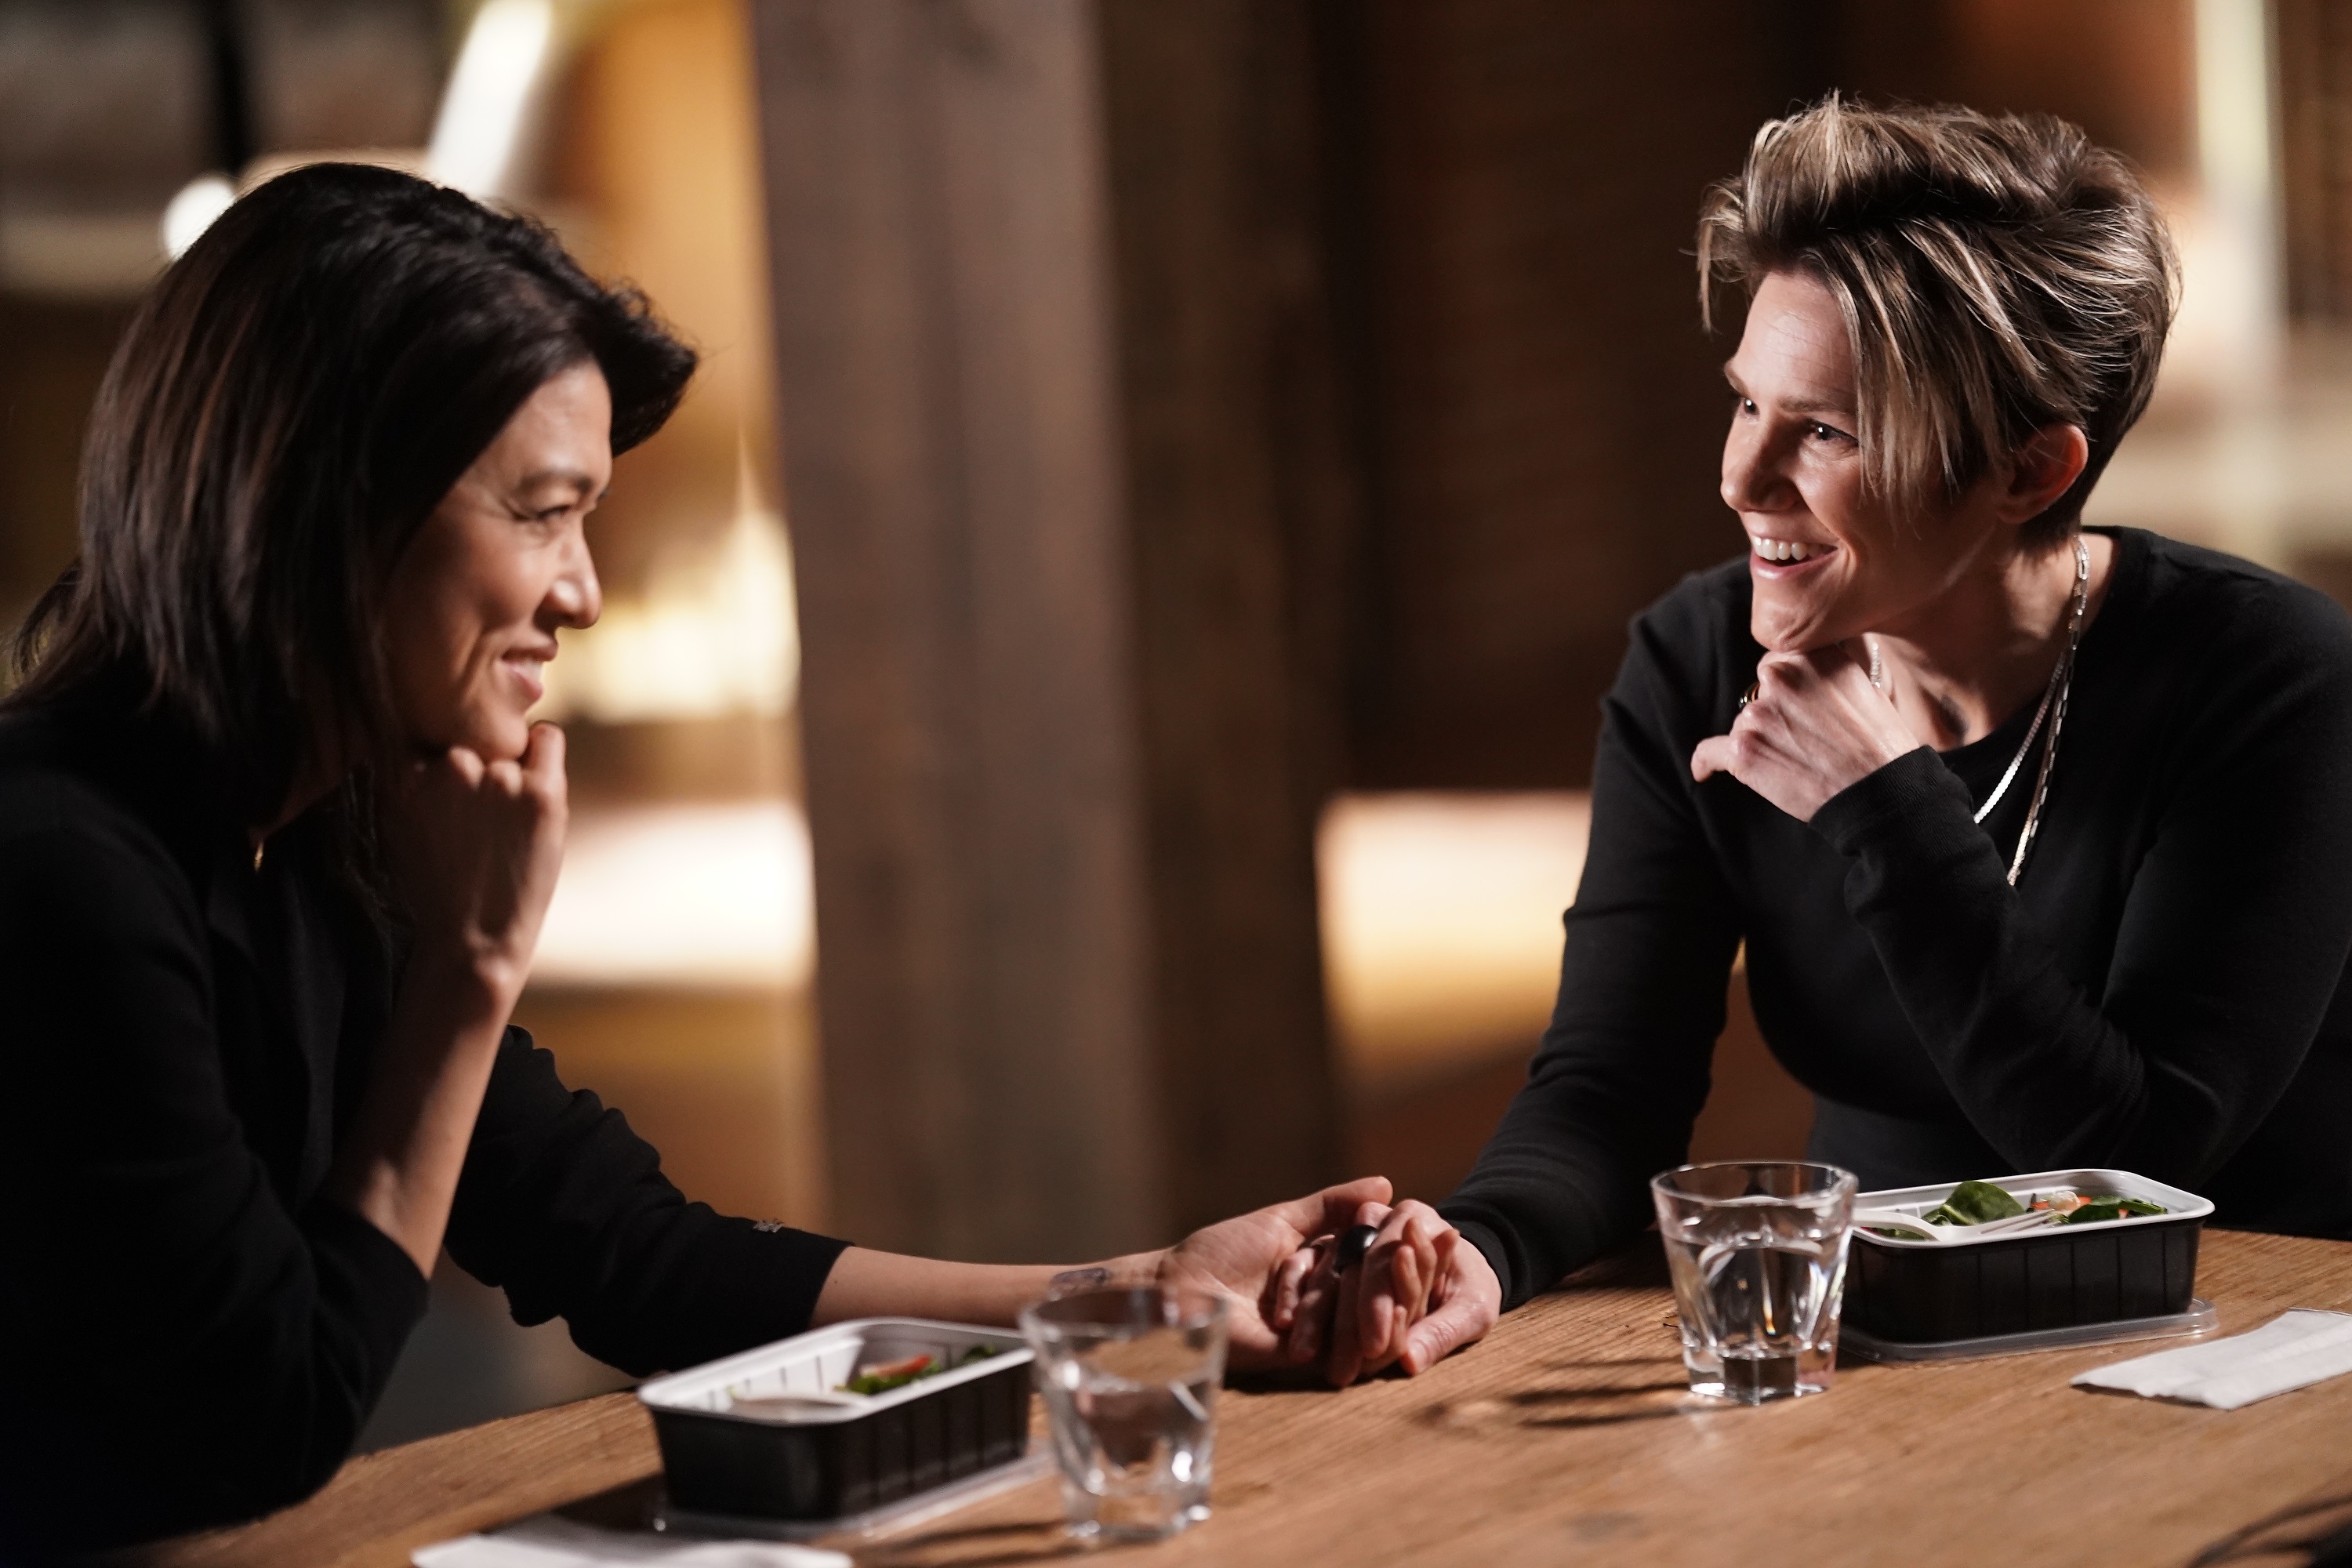 'A Million Little Things' cast members Grace Park and Cameron Esposito sitting together eating and talking